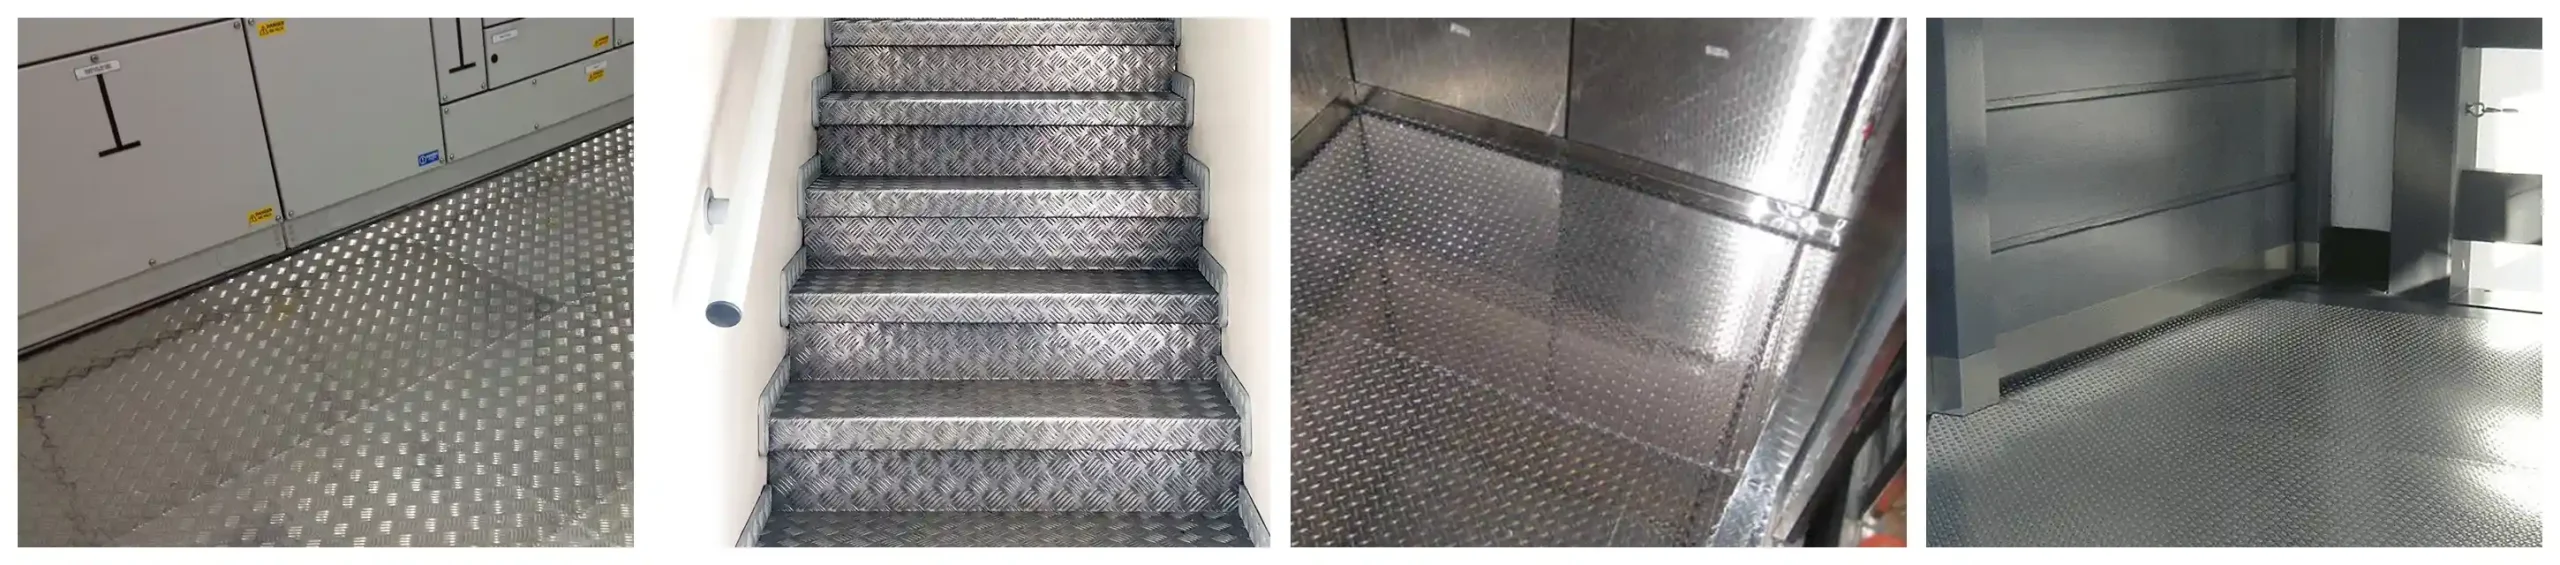 aluminum diamond checker plate coil in elevator, stairs